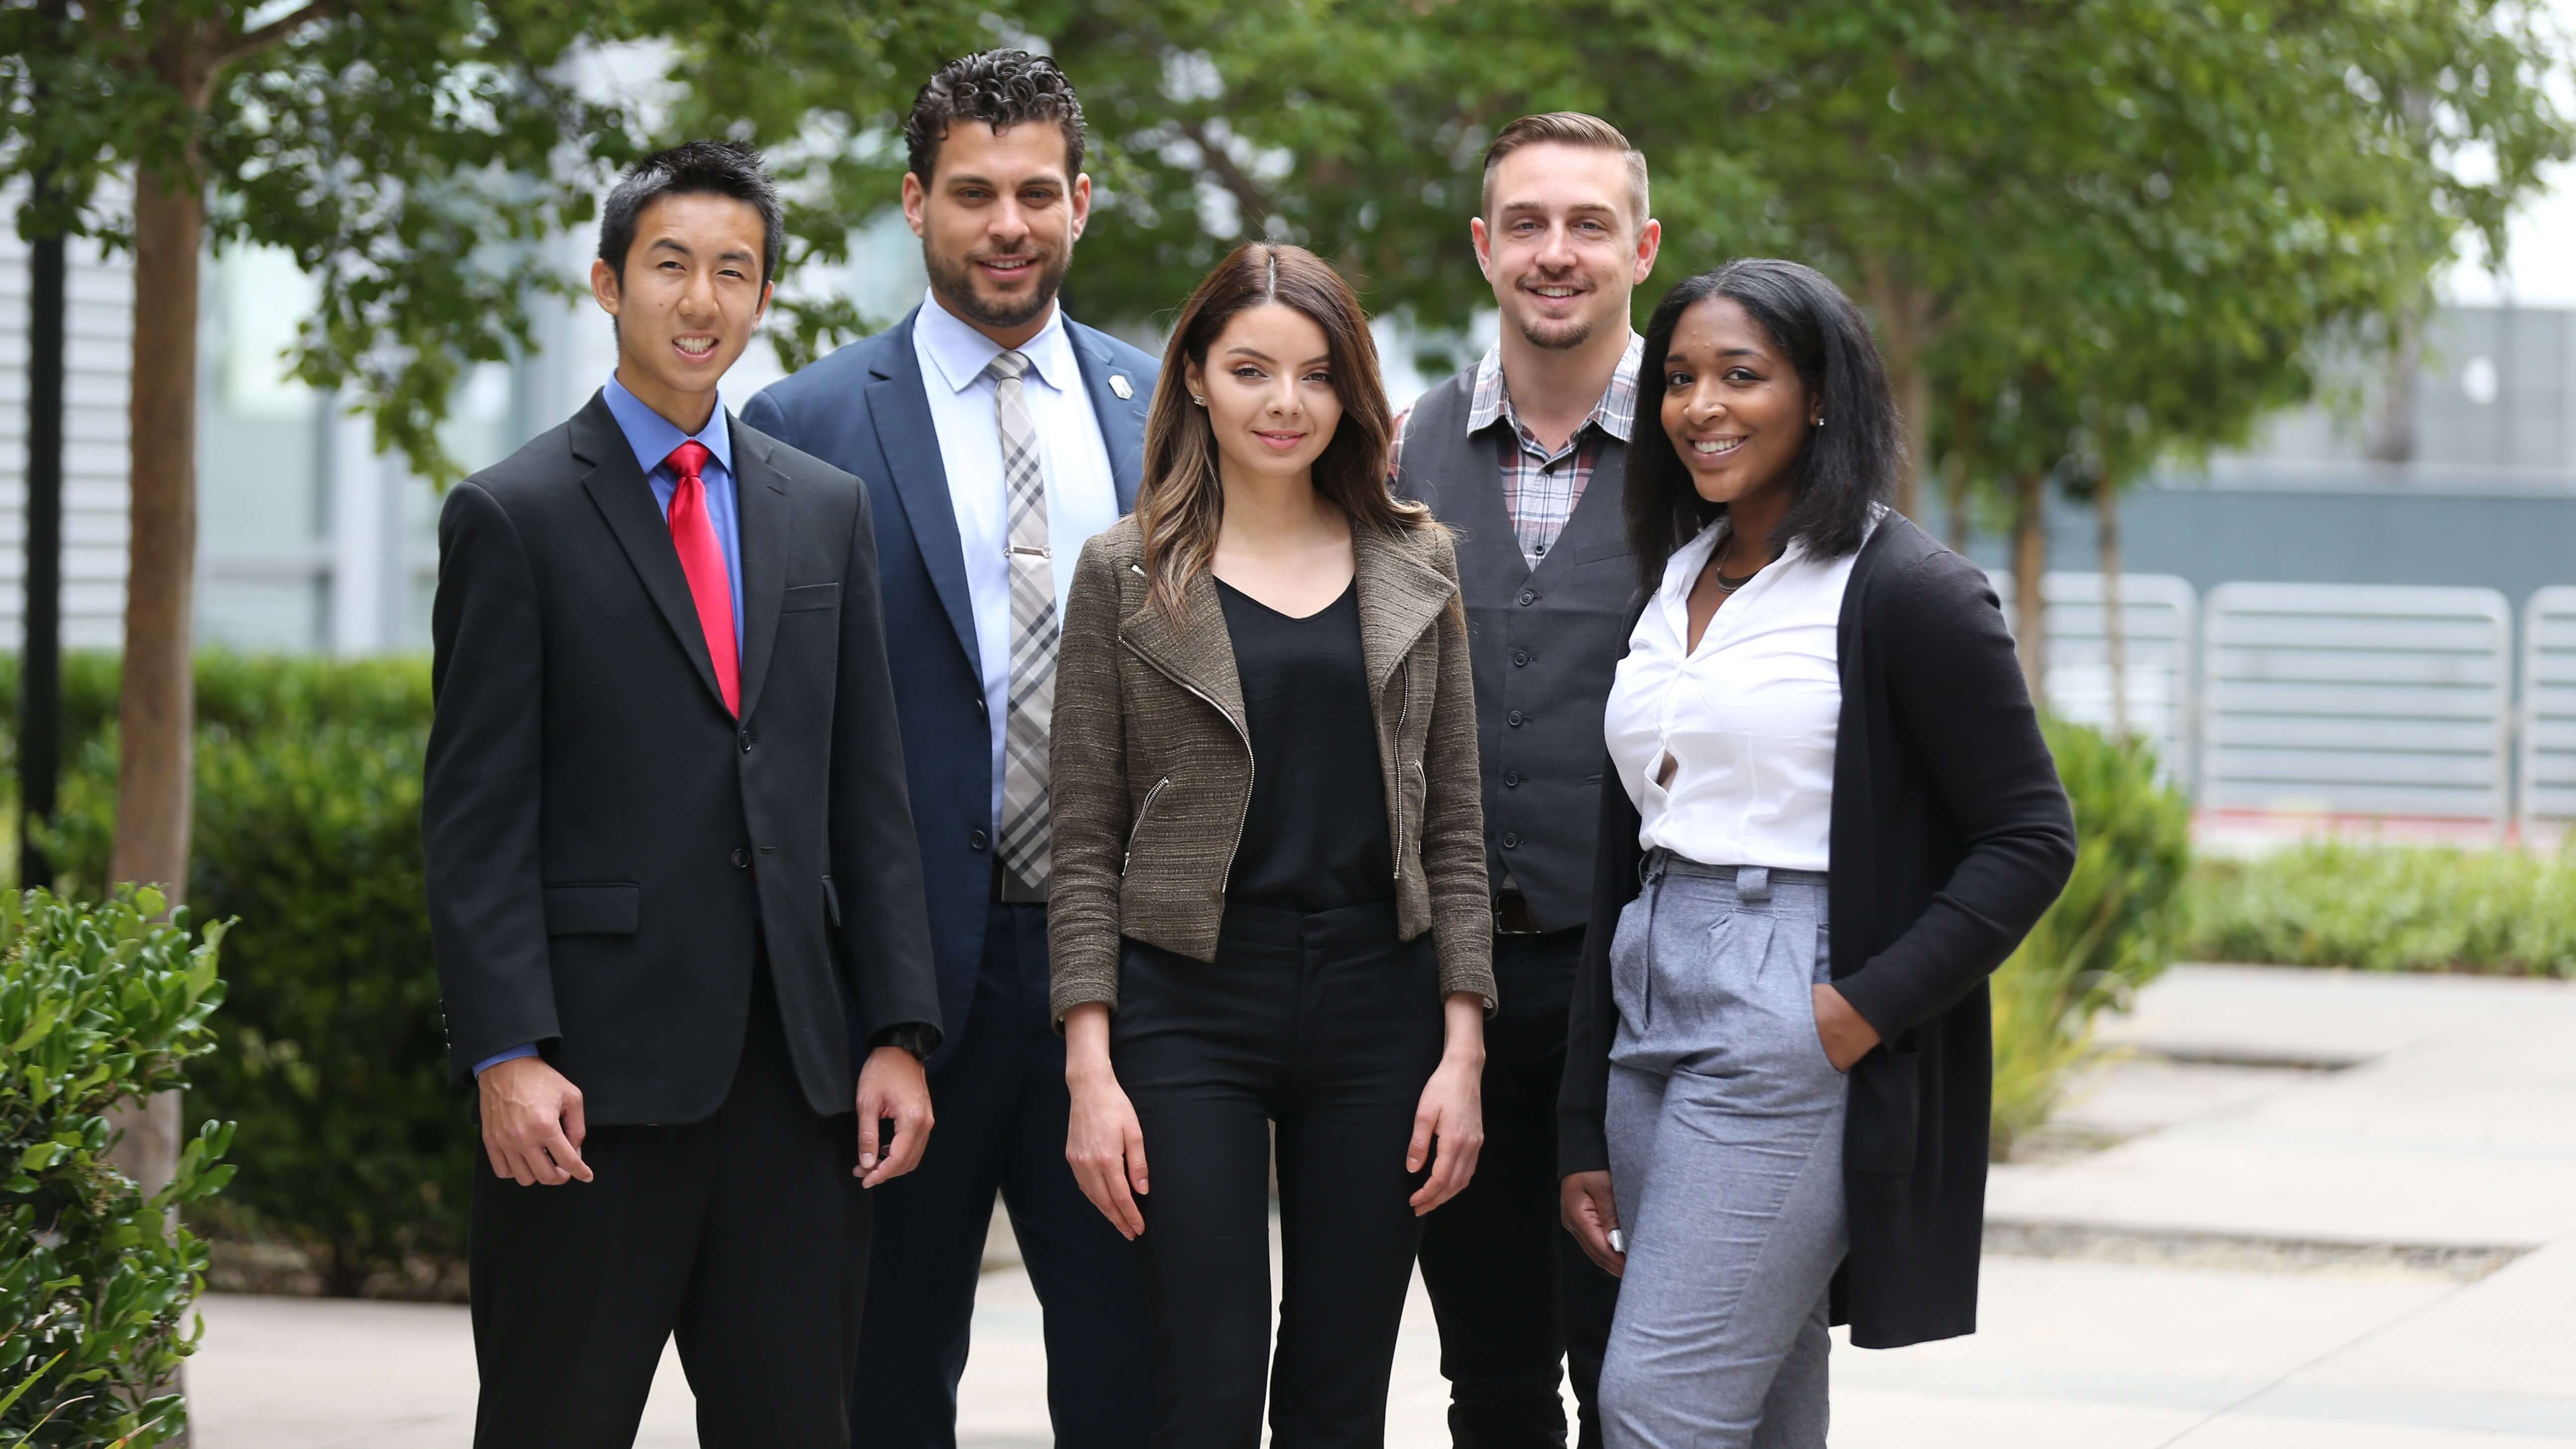 five college students wearing business attire